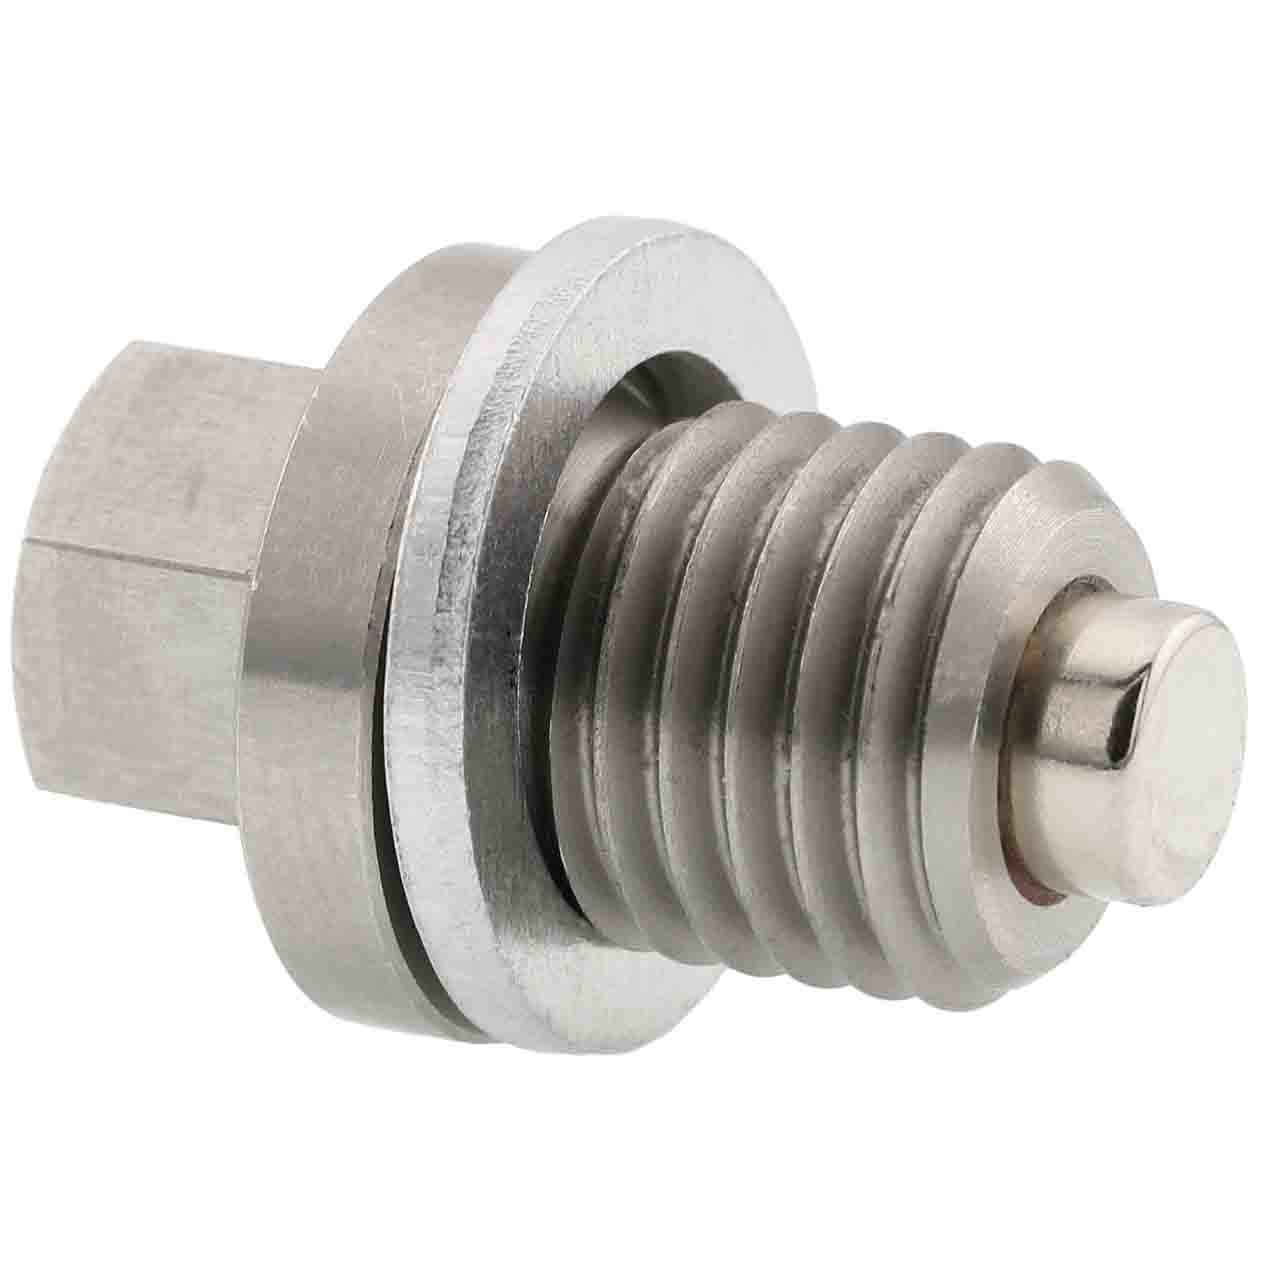 WEN Generator 9500 Watt - Model GN9500 Magnetic Oil Drain Plug - Made In USA - Stainless Steel - Part Number GN9500-186